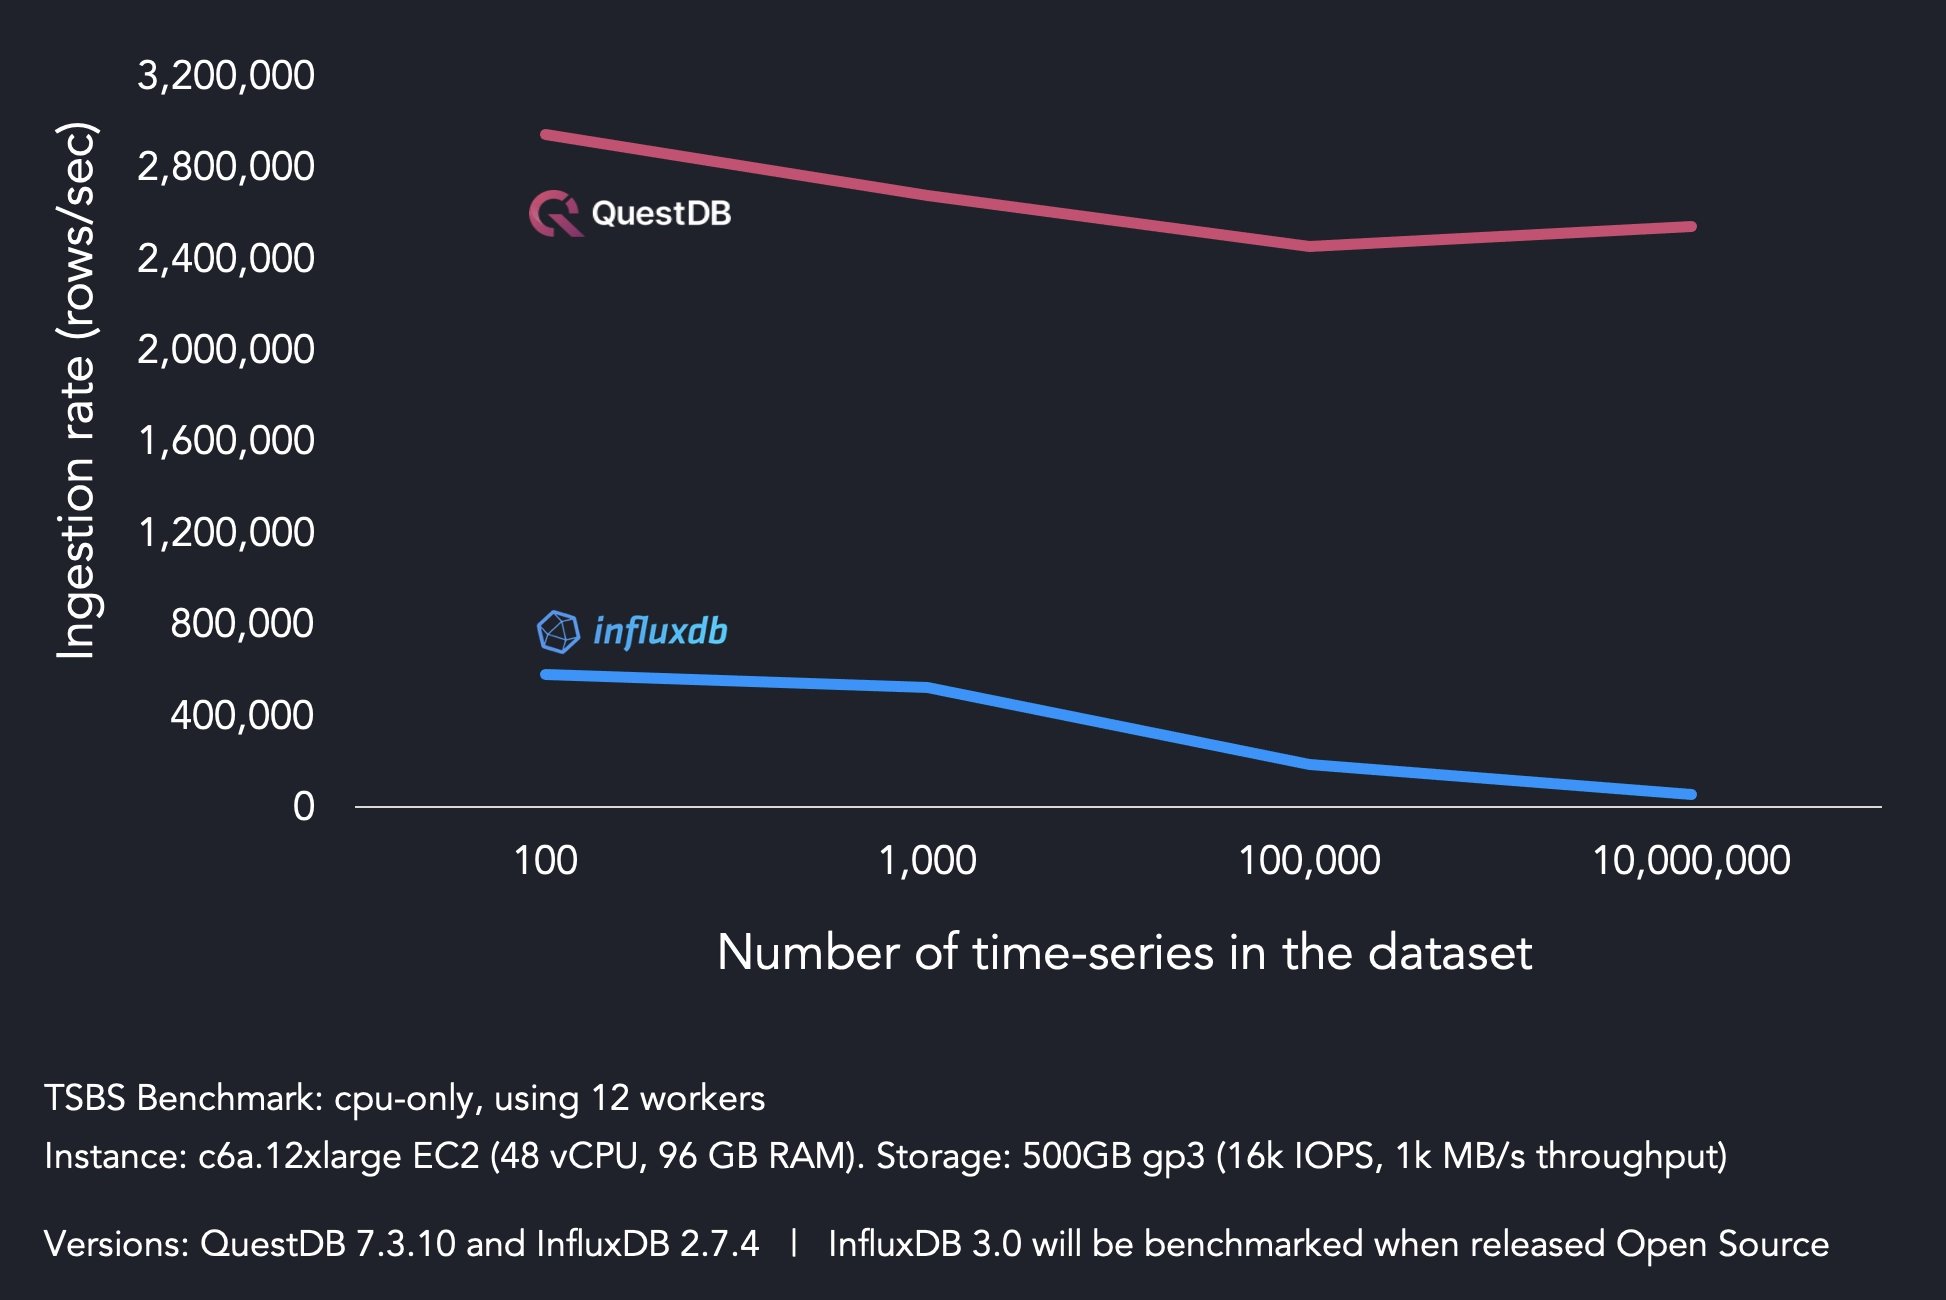 Ingestion results comparing QuestDB and InfluxDB using the time series benchmark suite